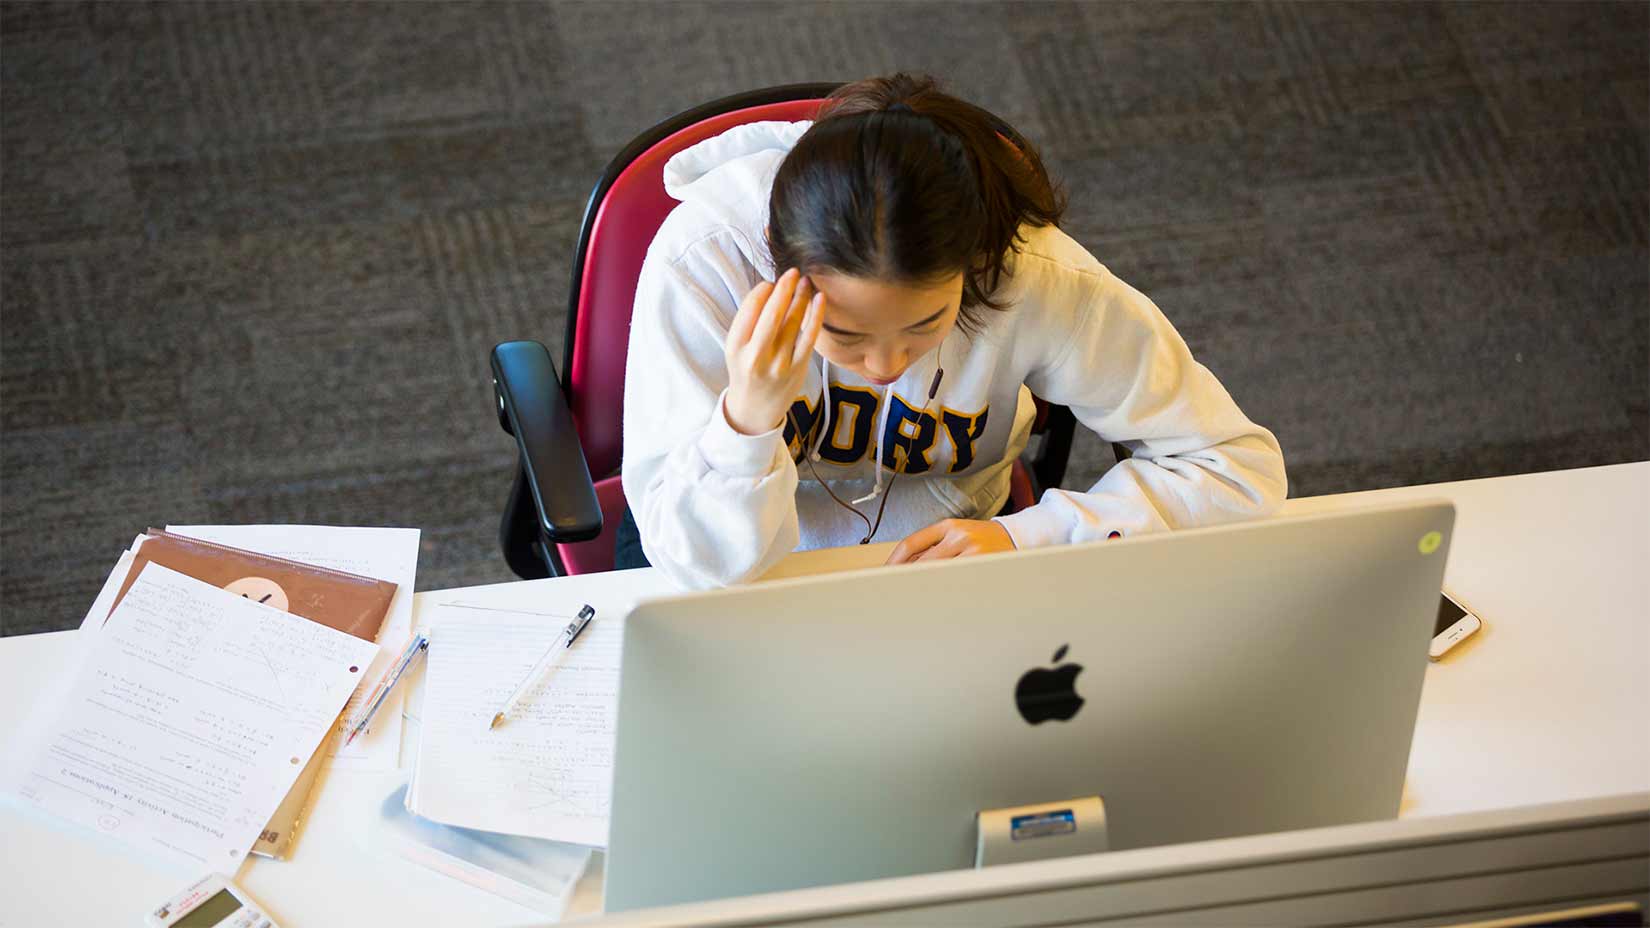 The Oxford library serves students as a space to study, relax, and recharge.